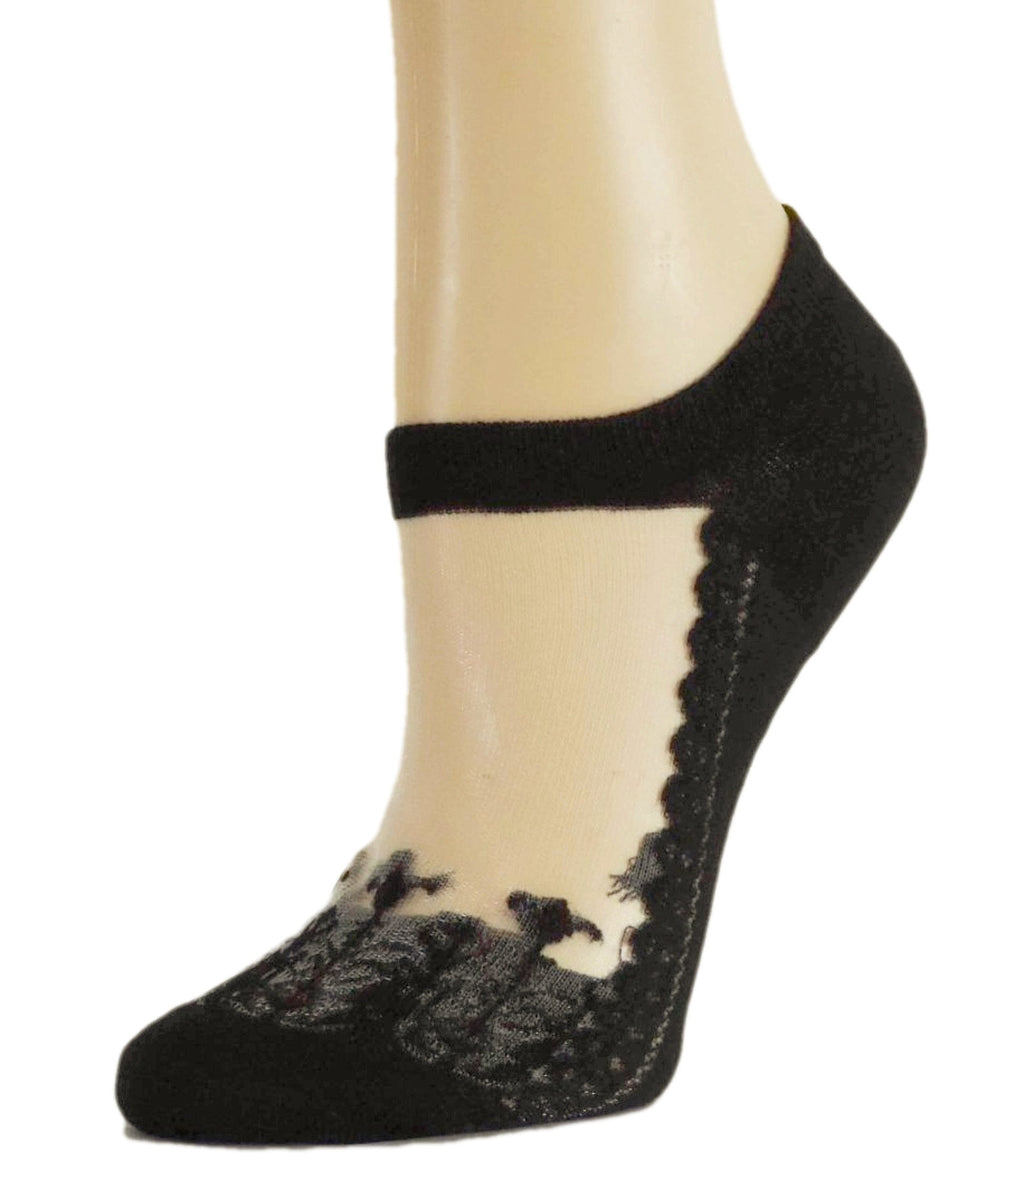 Embroidery Ankle Sheer Socks